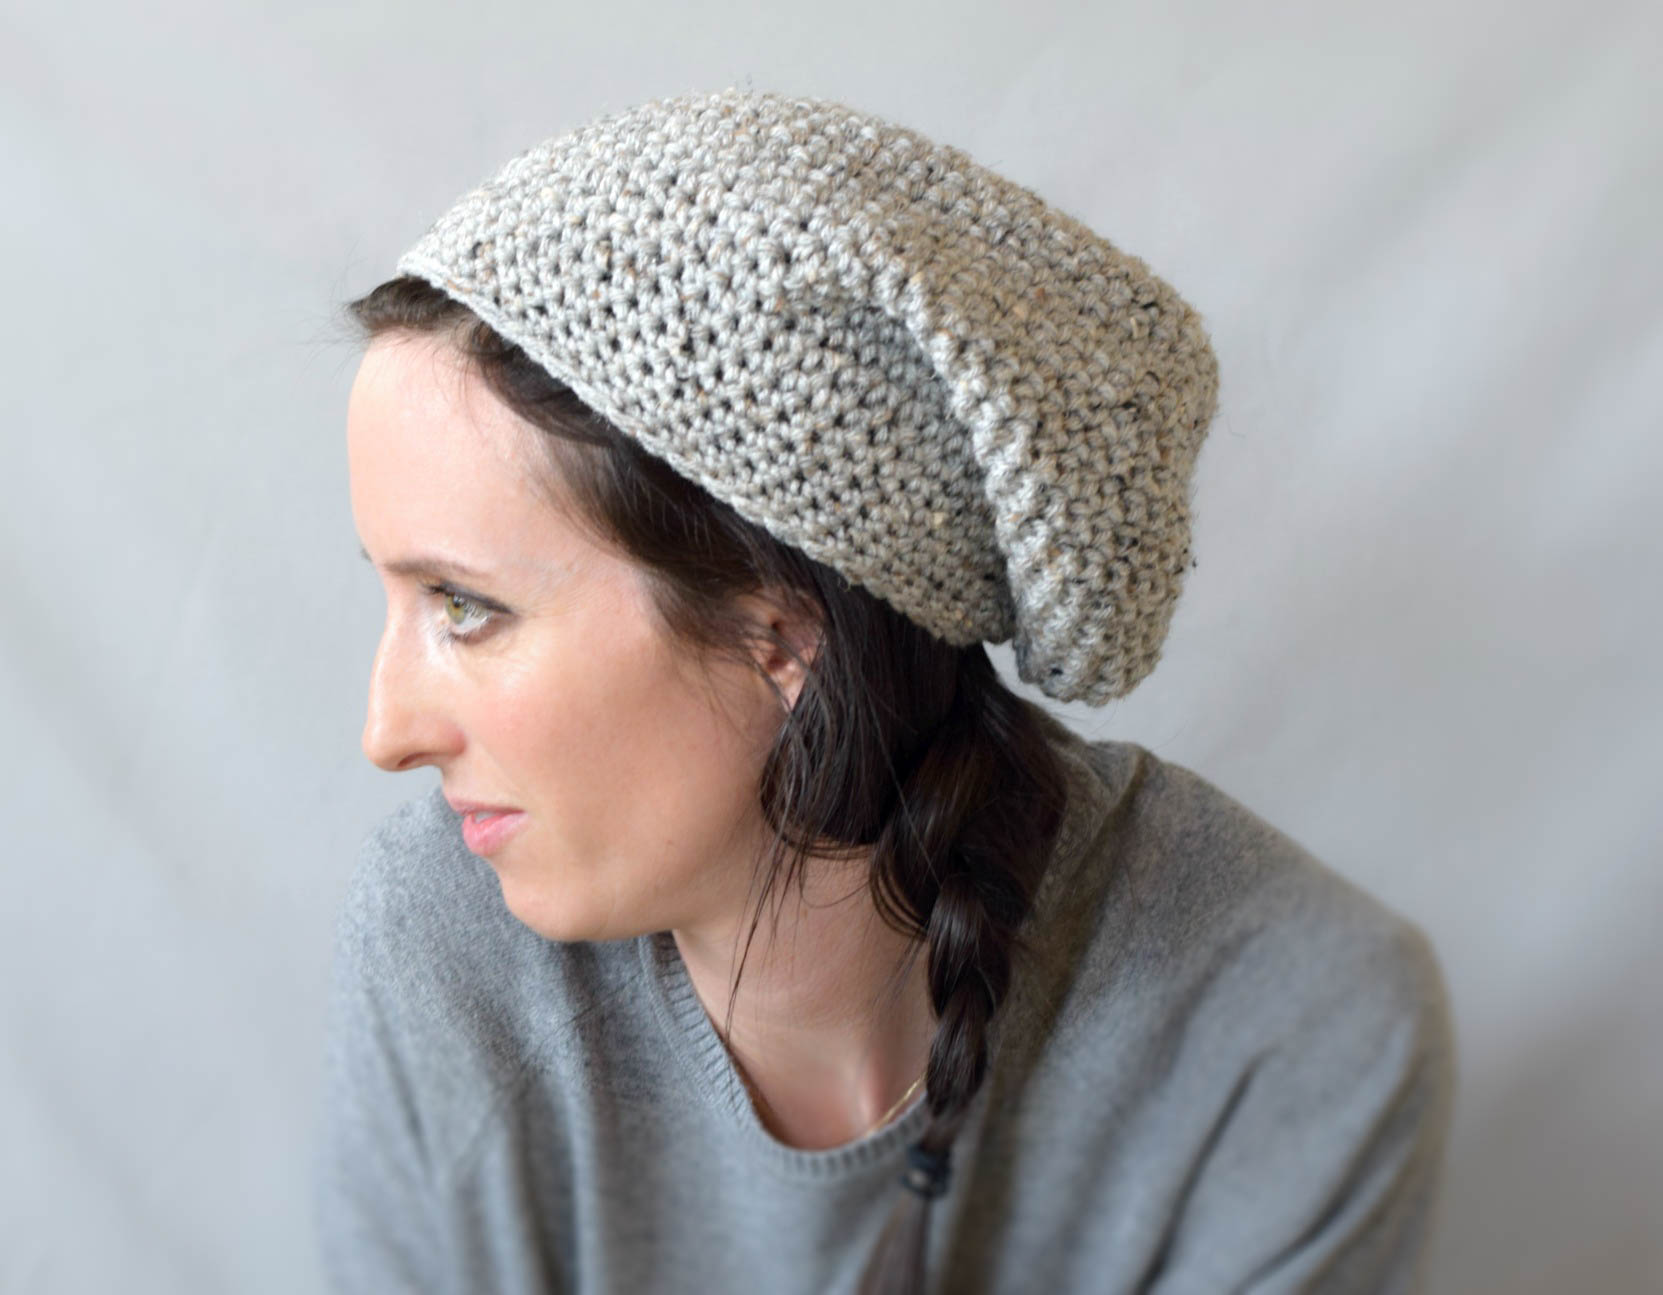 How To Crochet An Easy Slouchy Hat East Village Slouch